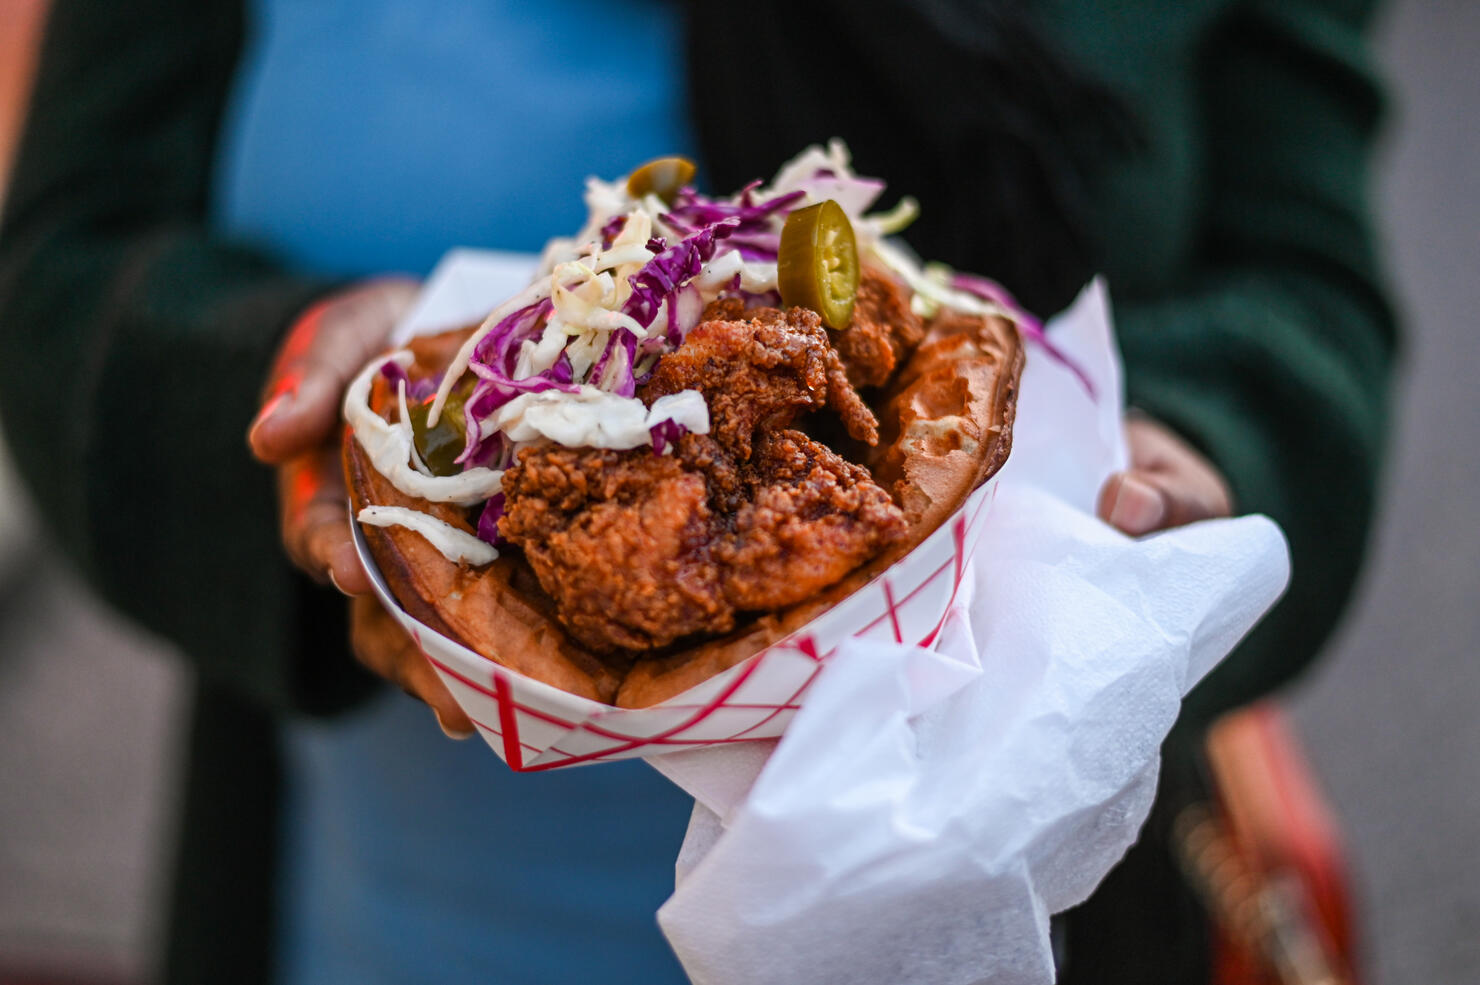 Close-Up Of Hand Holding A Fried Chicken Sandwich